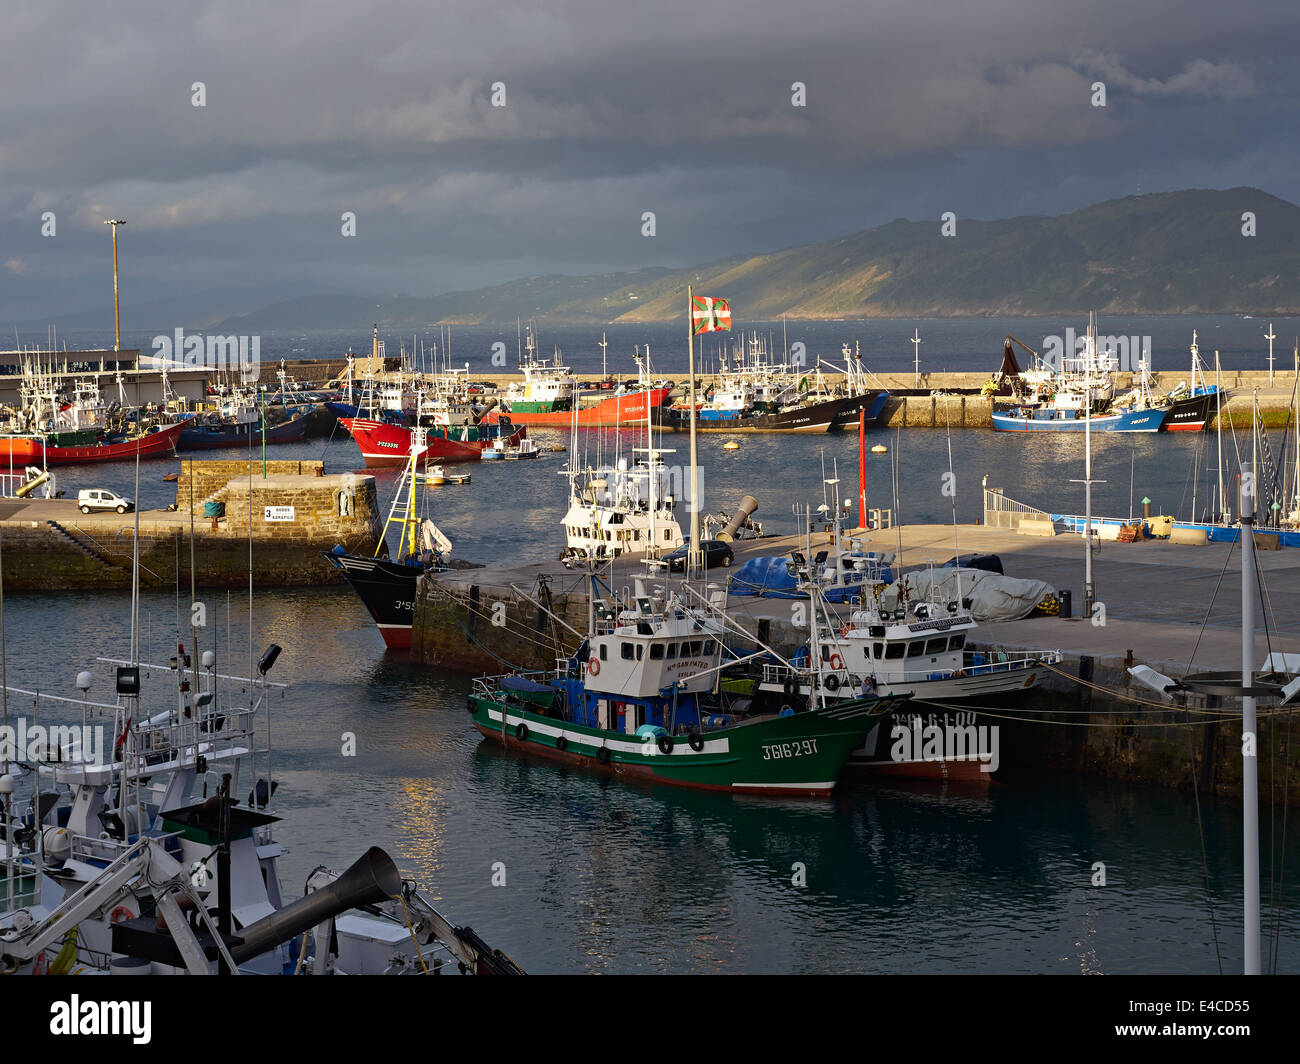 Getaria, Gipuzkoa, Basque Country, Spain. The busy commercial fishing port. Stock Photo